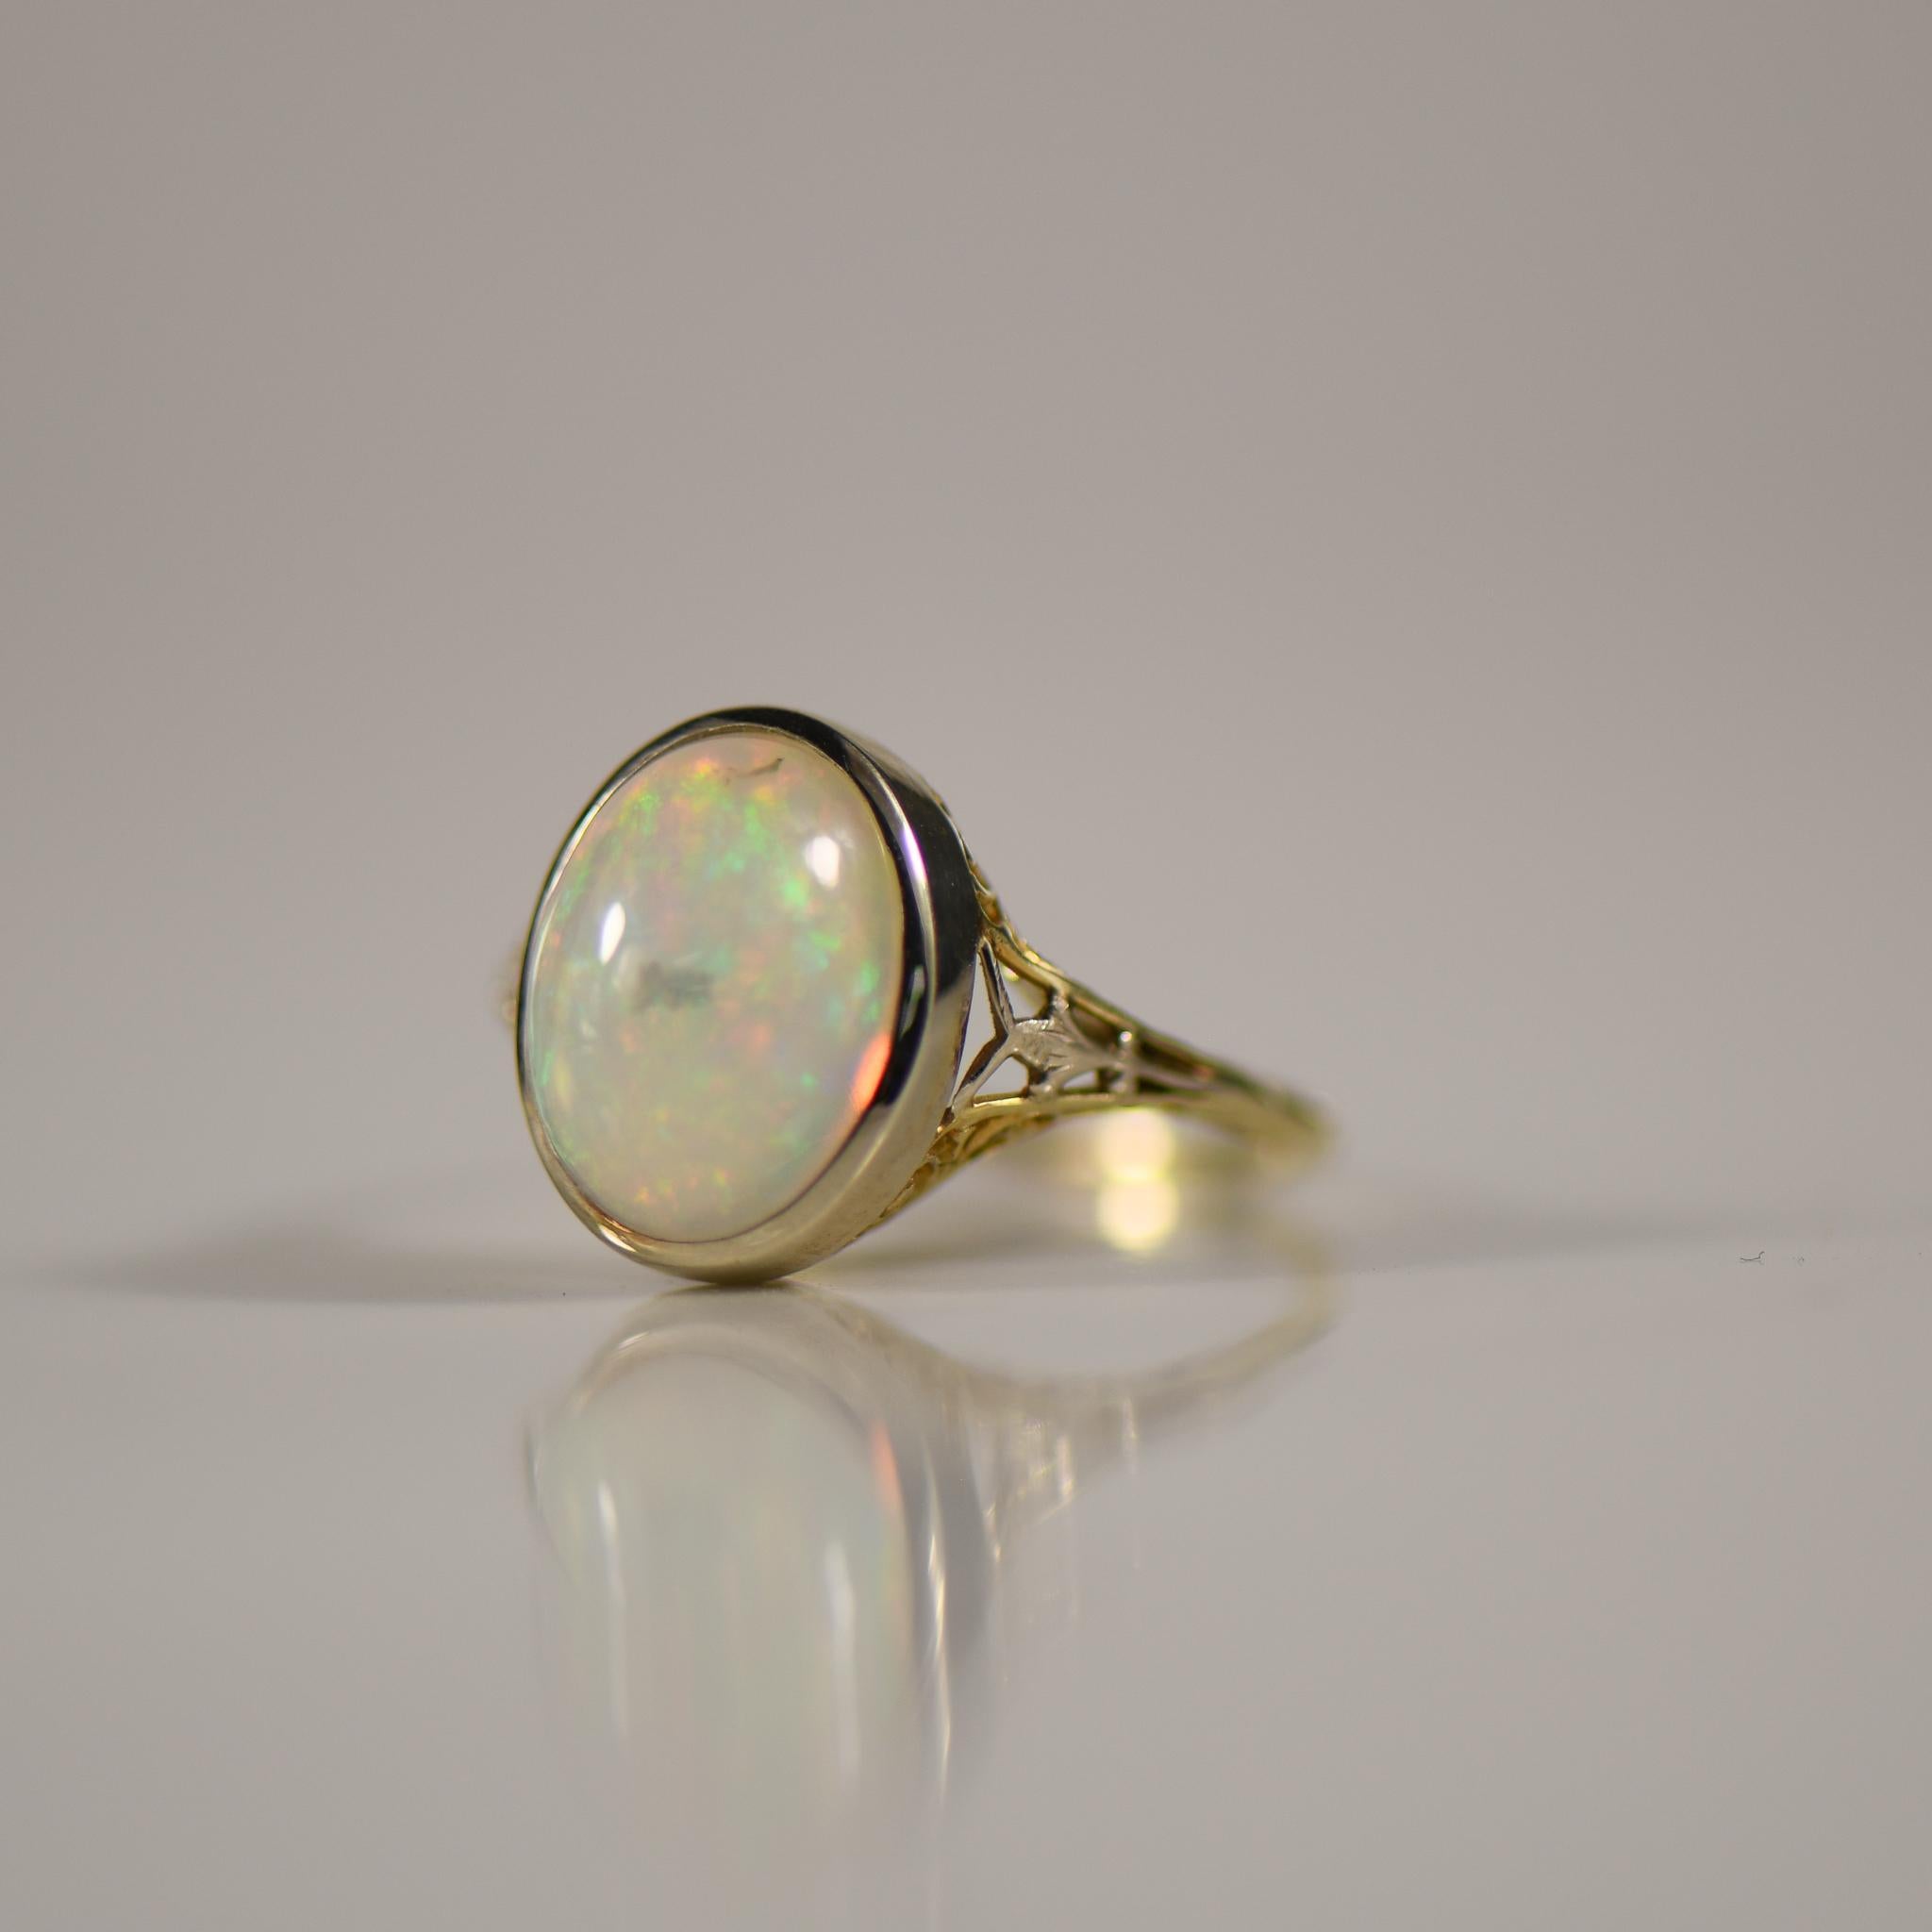 1920's Art Deco 14K Two Tone Bezel Set 4.5ct Oval Opal Cabochon Solitaire Ring For Sale 2